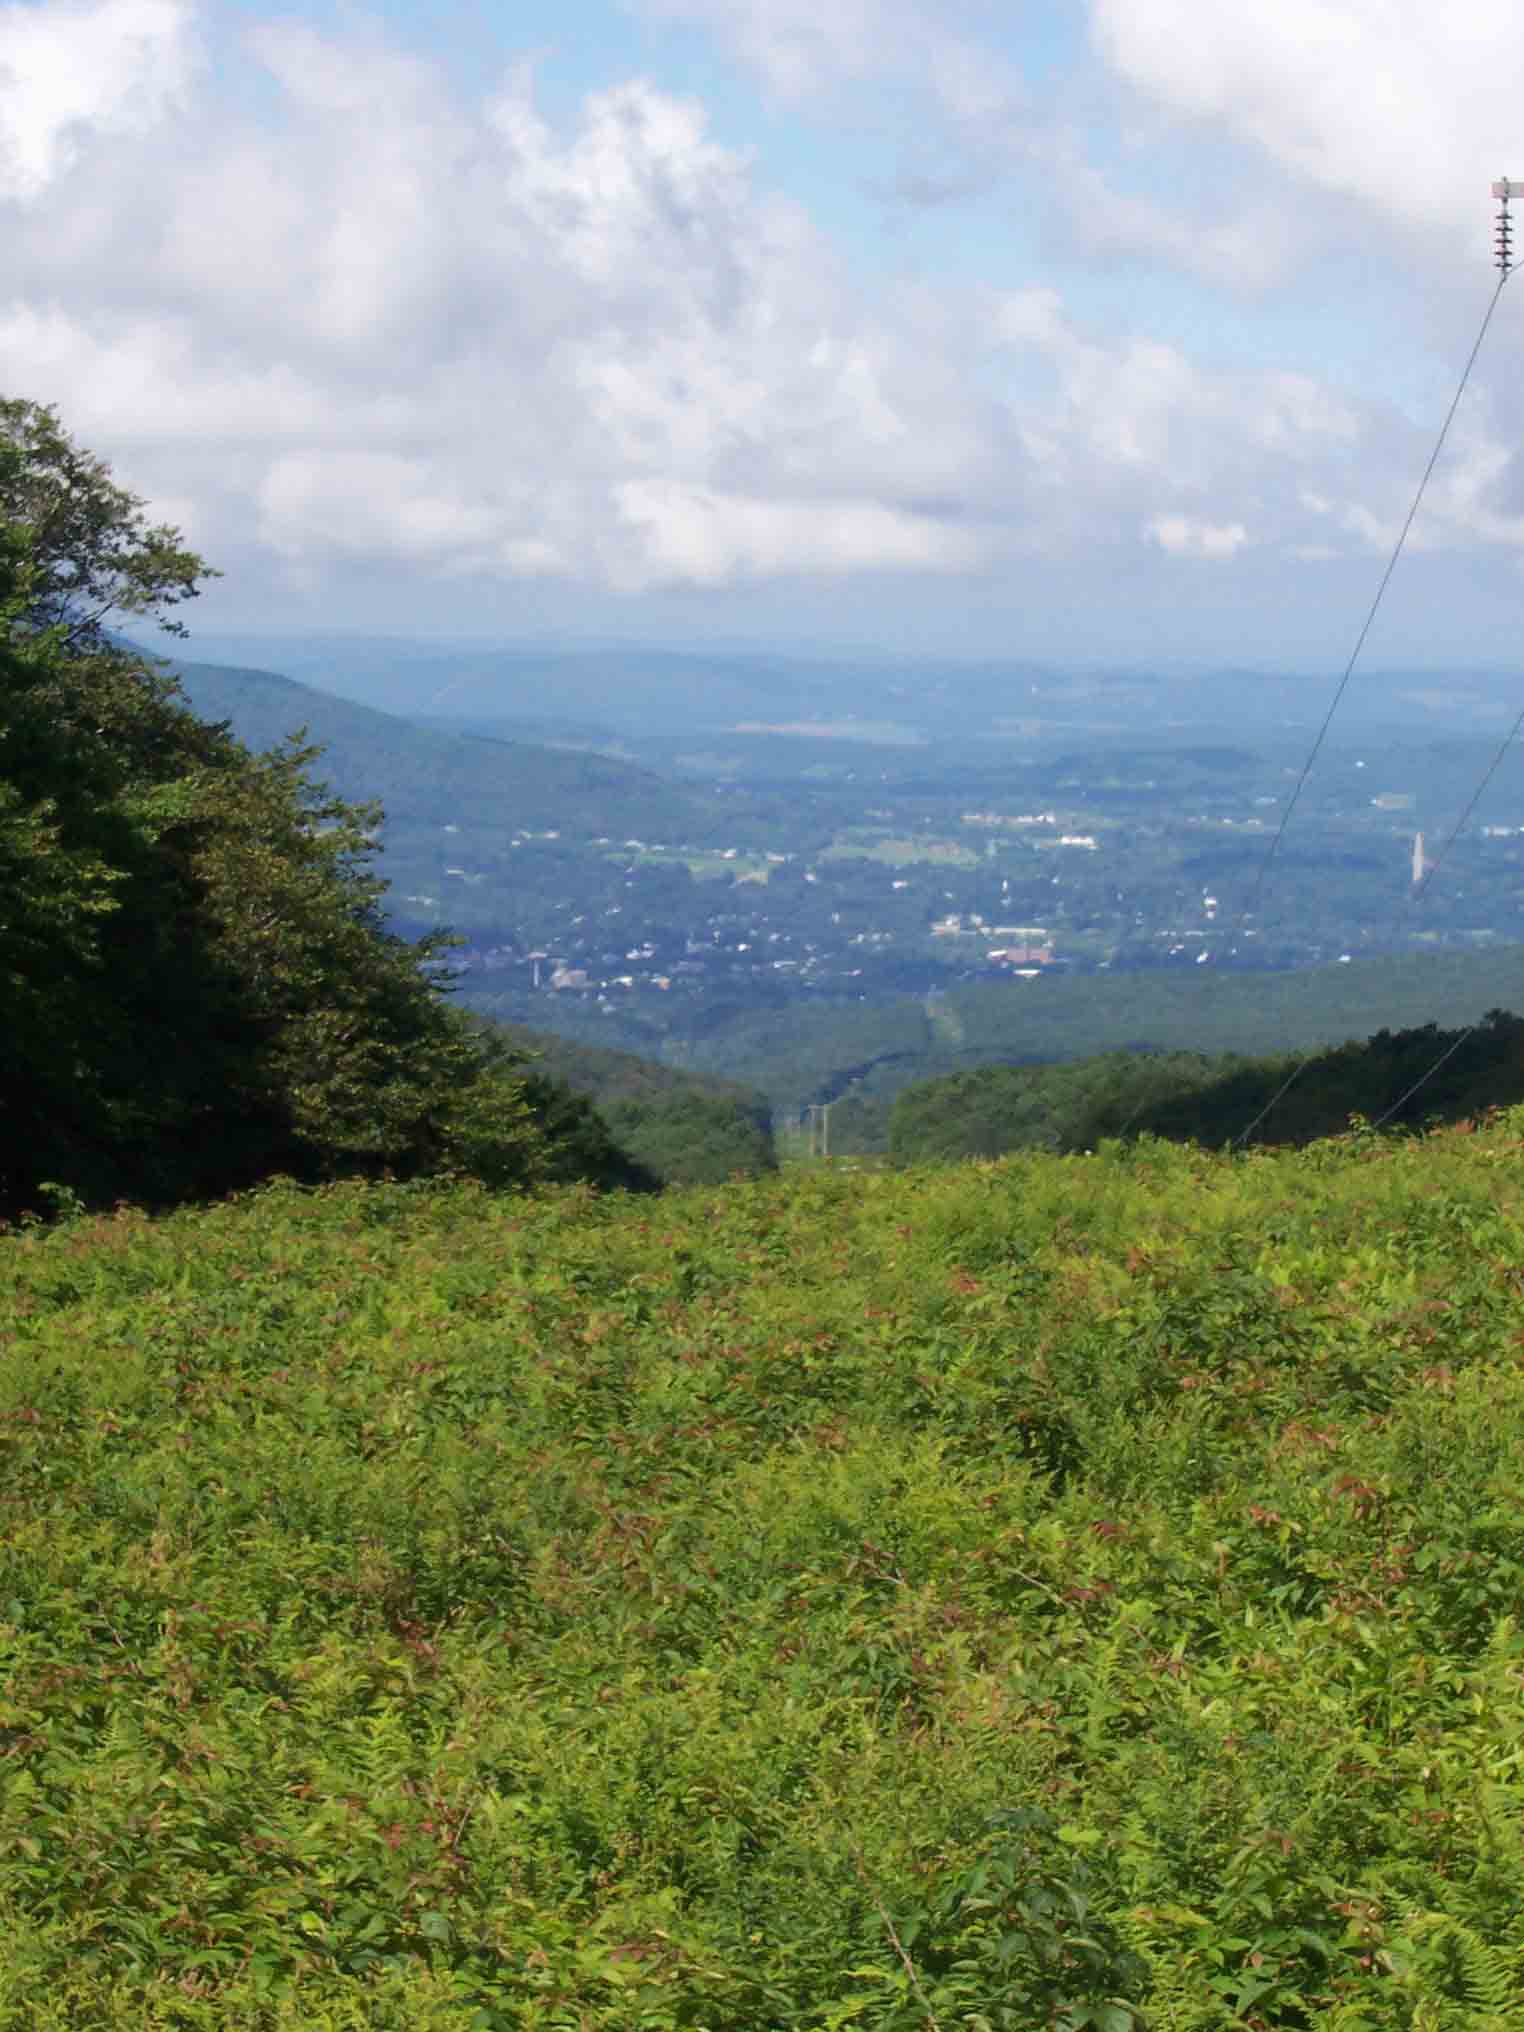 mm 20.5 - View from powerline clearing on summit of Maple Hill towards Bennington.  Courtesy dlcul@conncoll.edu